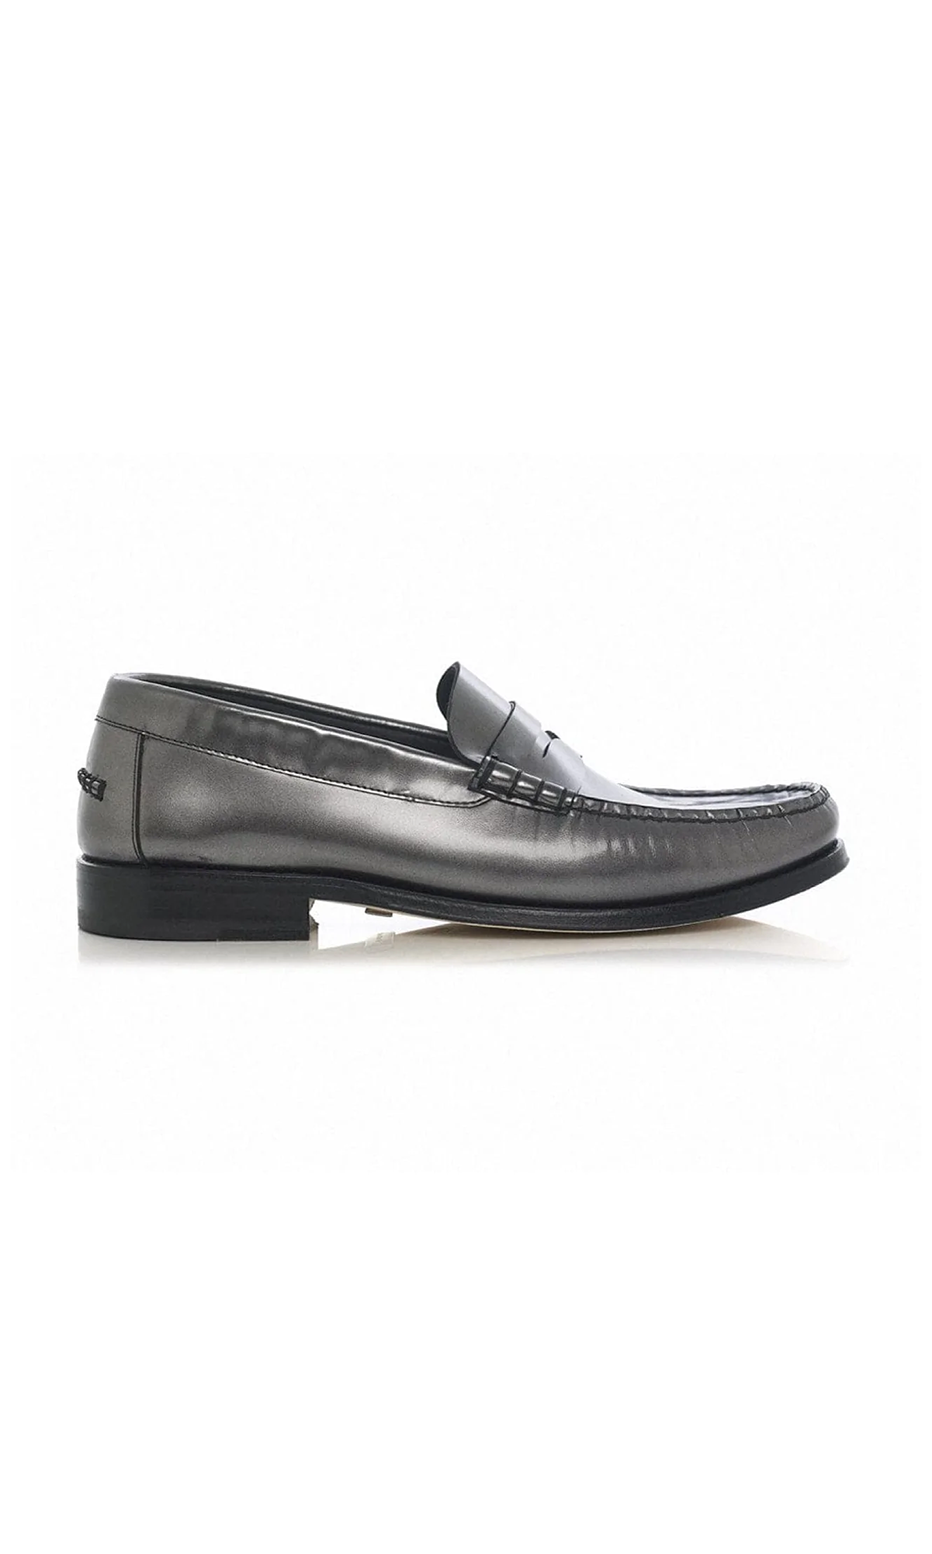 classic loafers mariano